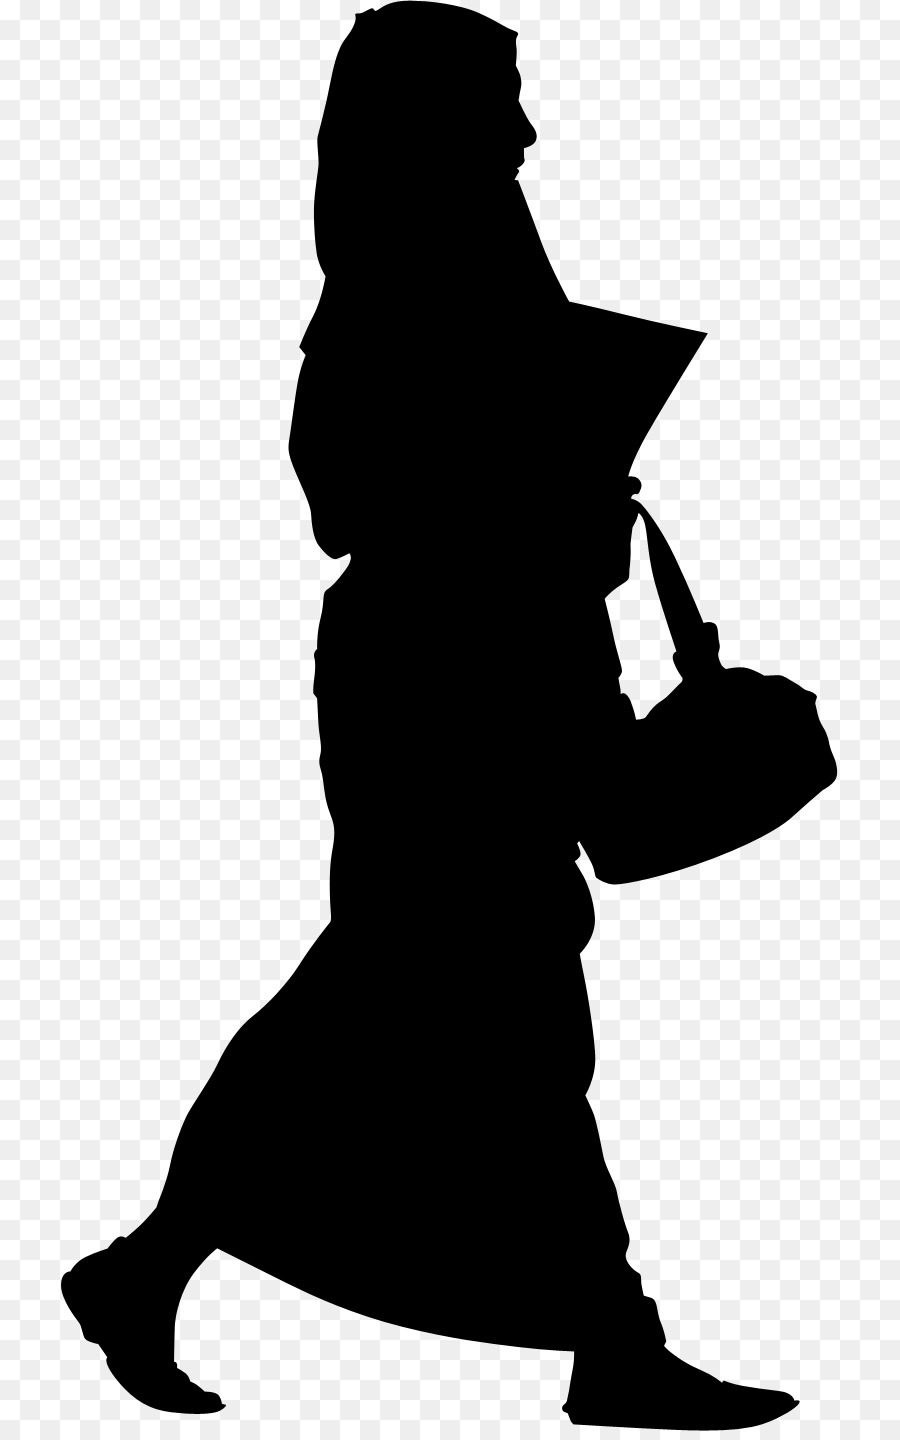 Clip art Male Silhouette Black M -  png download - 777*1431 - Free Transparent Male png Download.